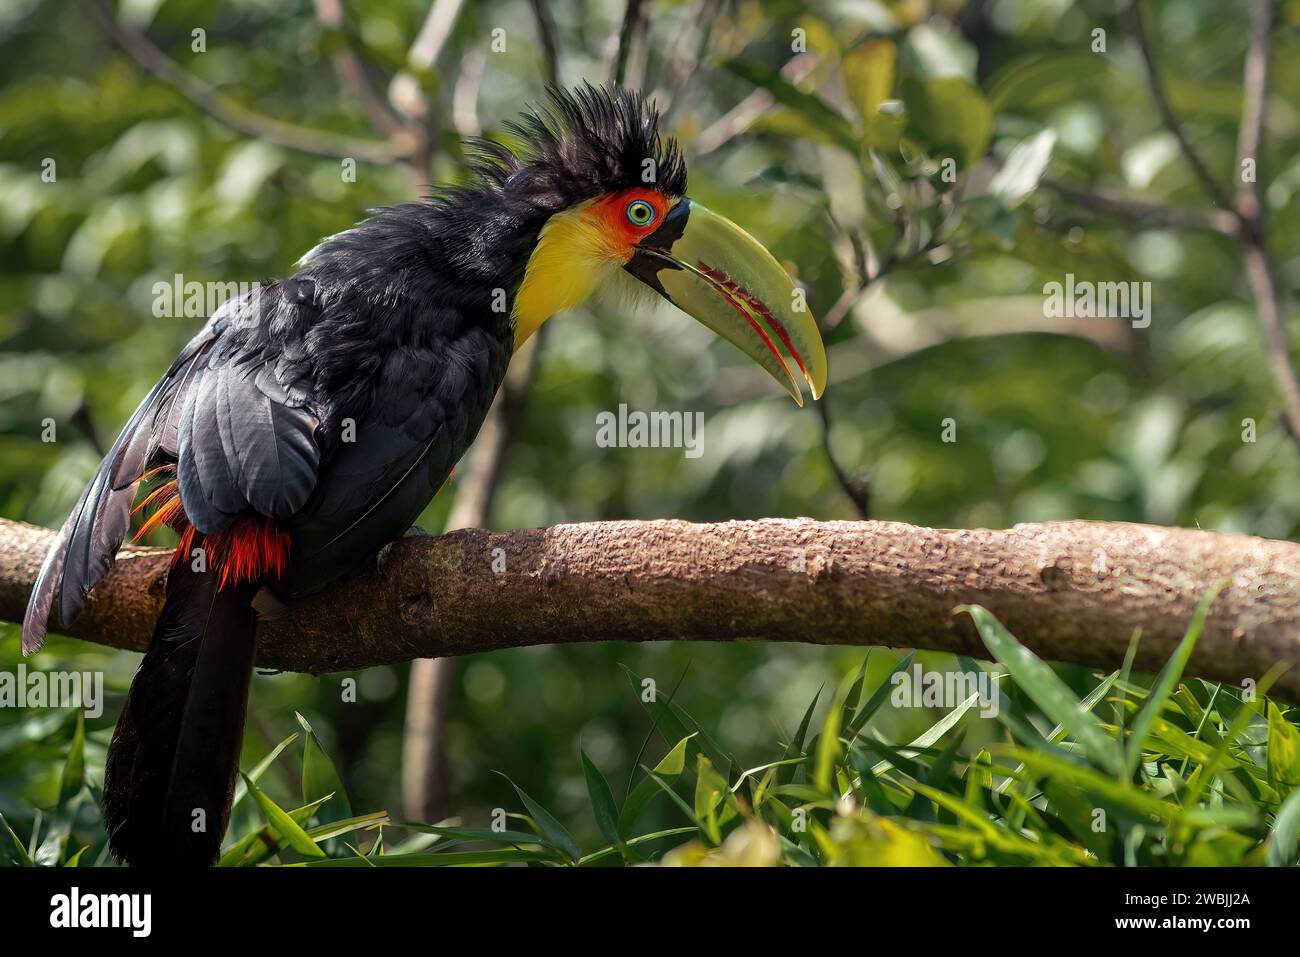 Red-breasted toucan or Green-billed toucan (Ramphastos dicolorus) Stock Photo